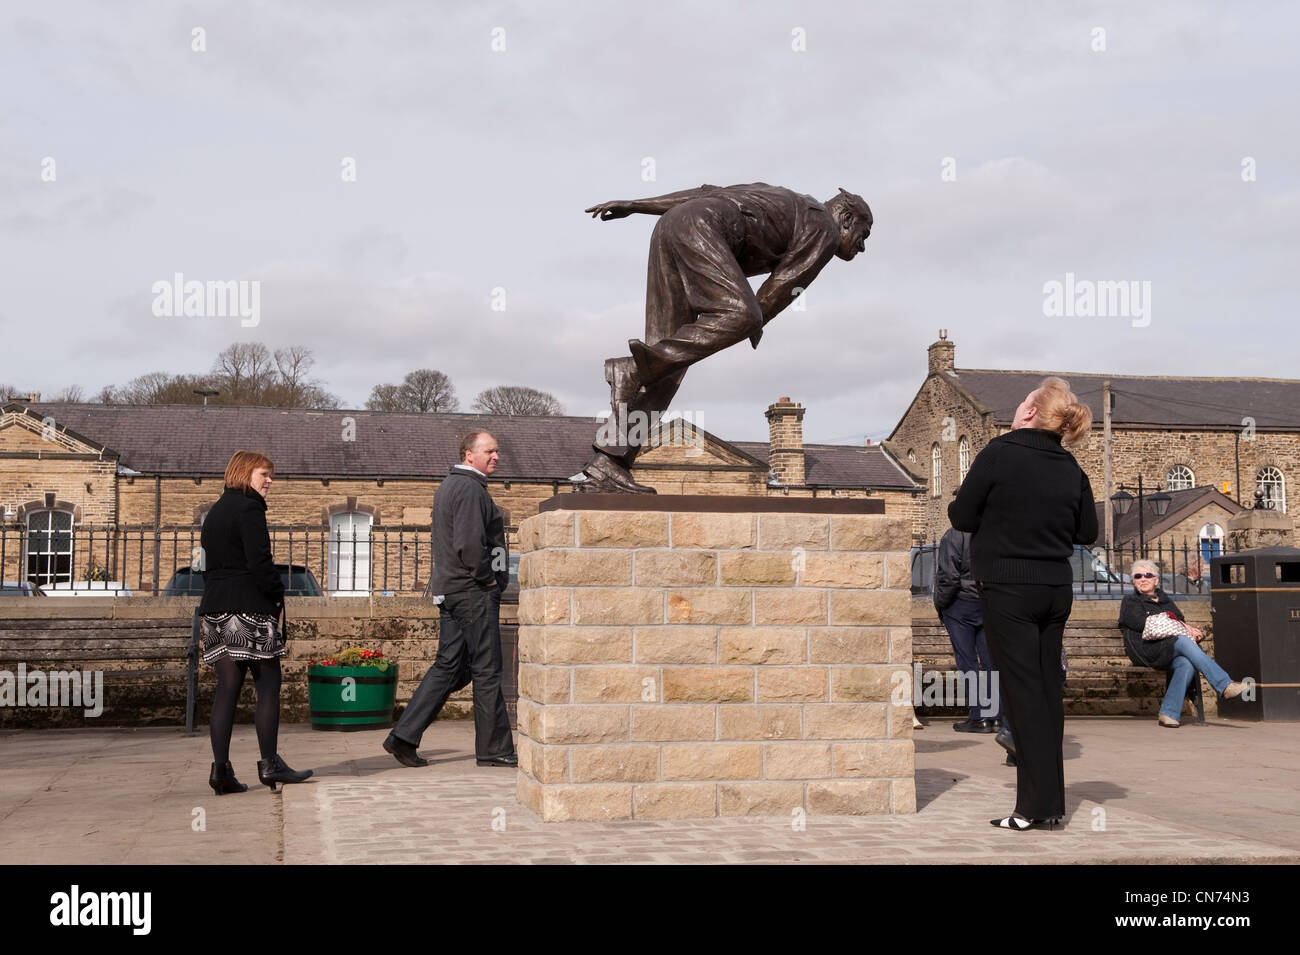 People standing, looking, walking by bronze statue of cricketer Fred (Freddie) Trueman (fast bower bowling) - Skipton, North Yorkshire, England UK Stock Photo